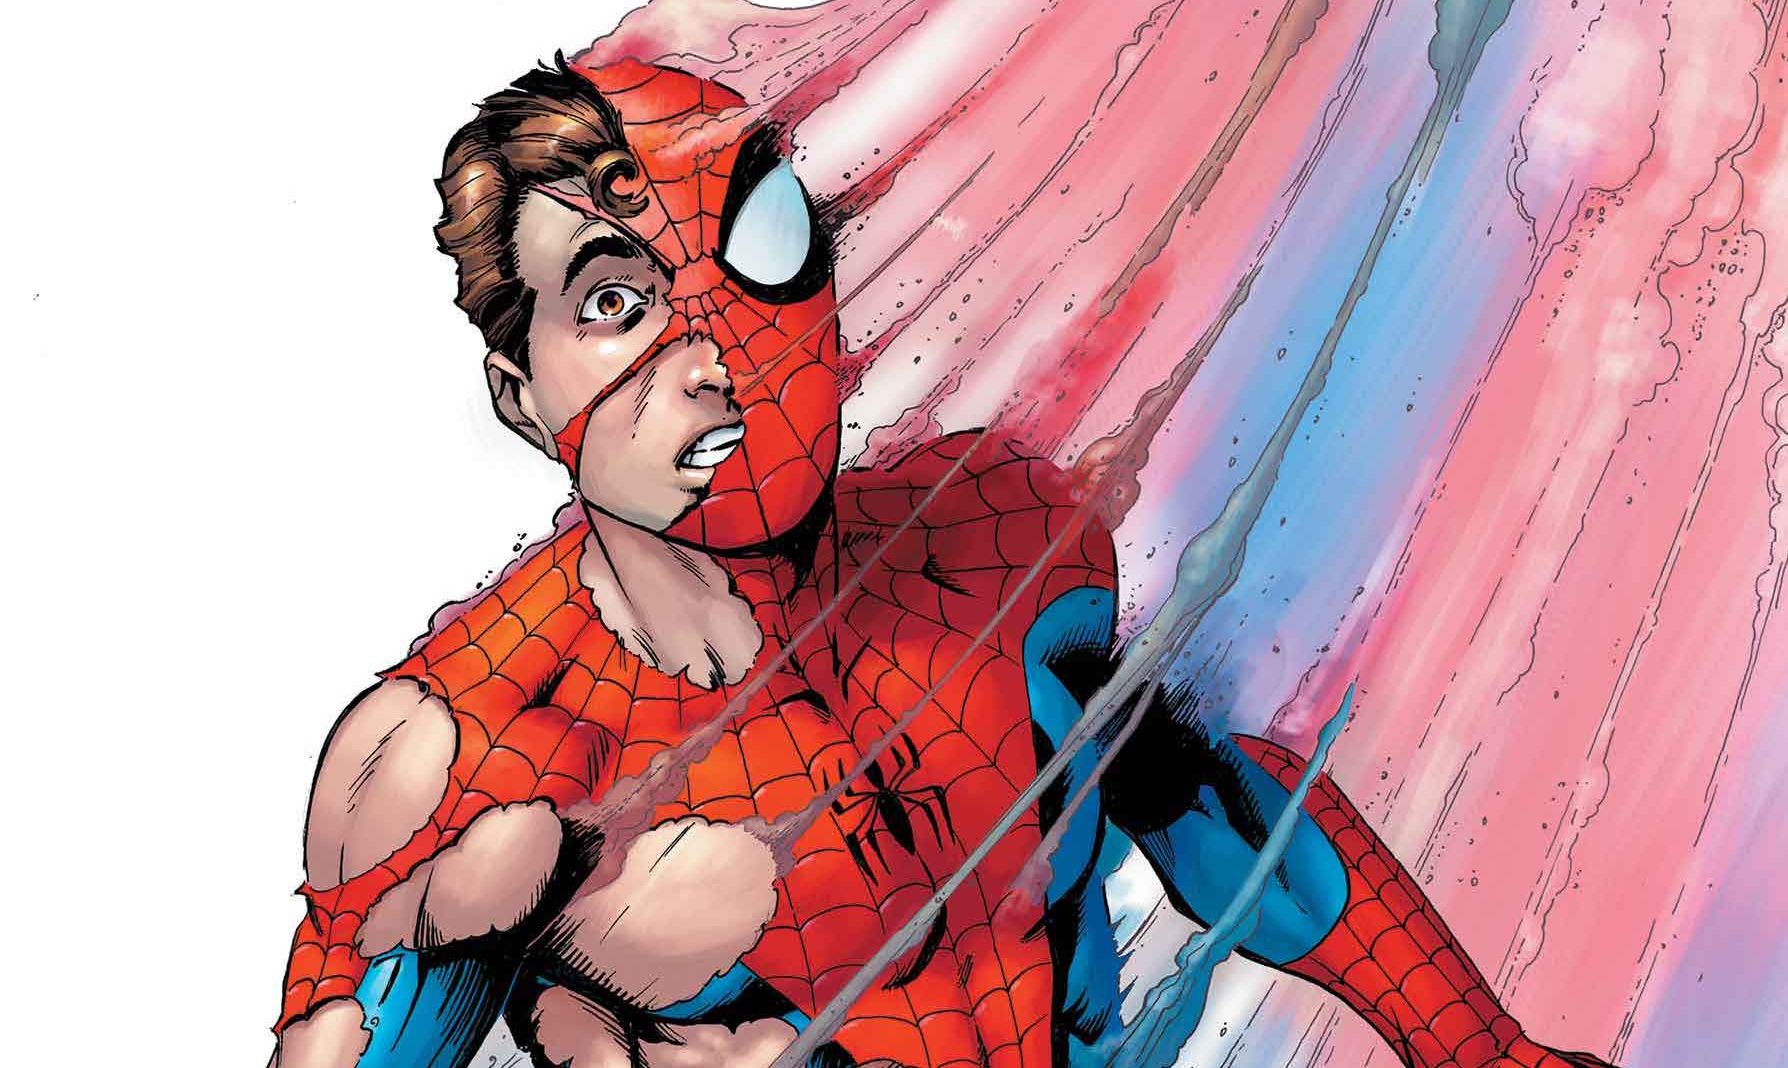 Spider-Man #5 (LGY #161) review